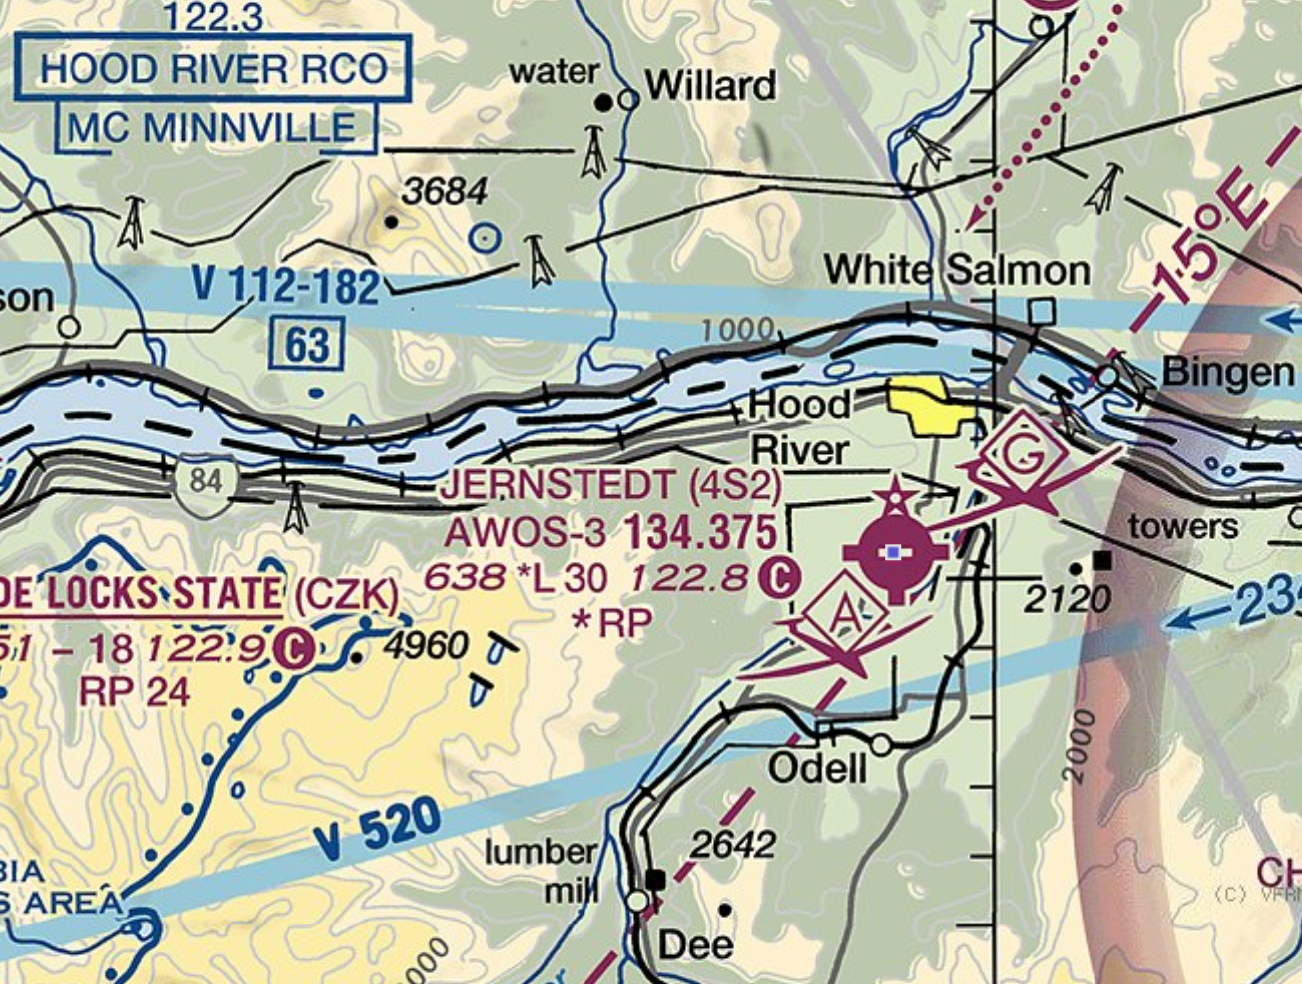 A small section of a VFR sectional chart. The focus is on Hood River.